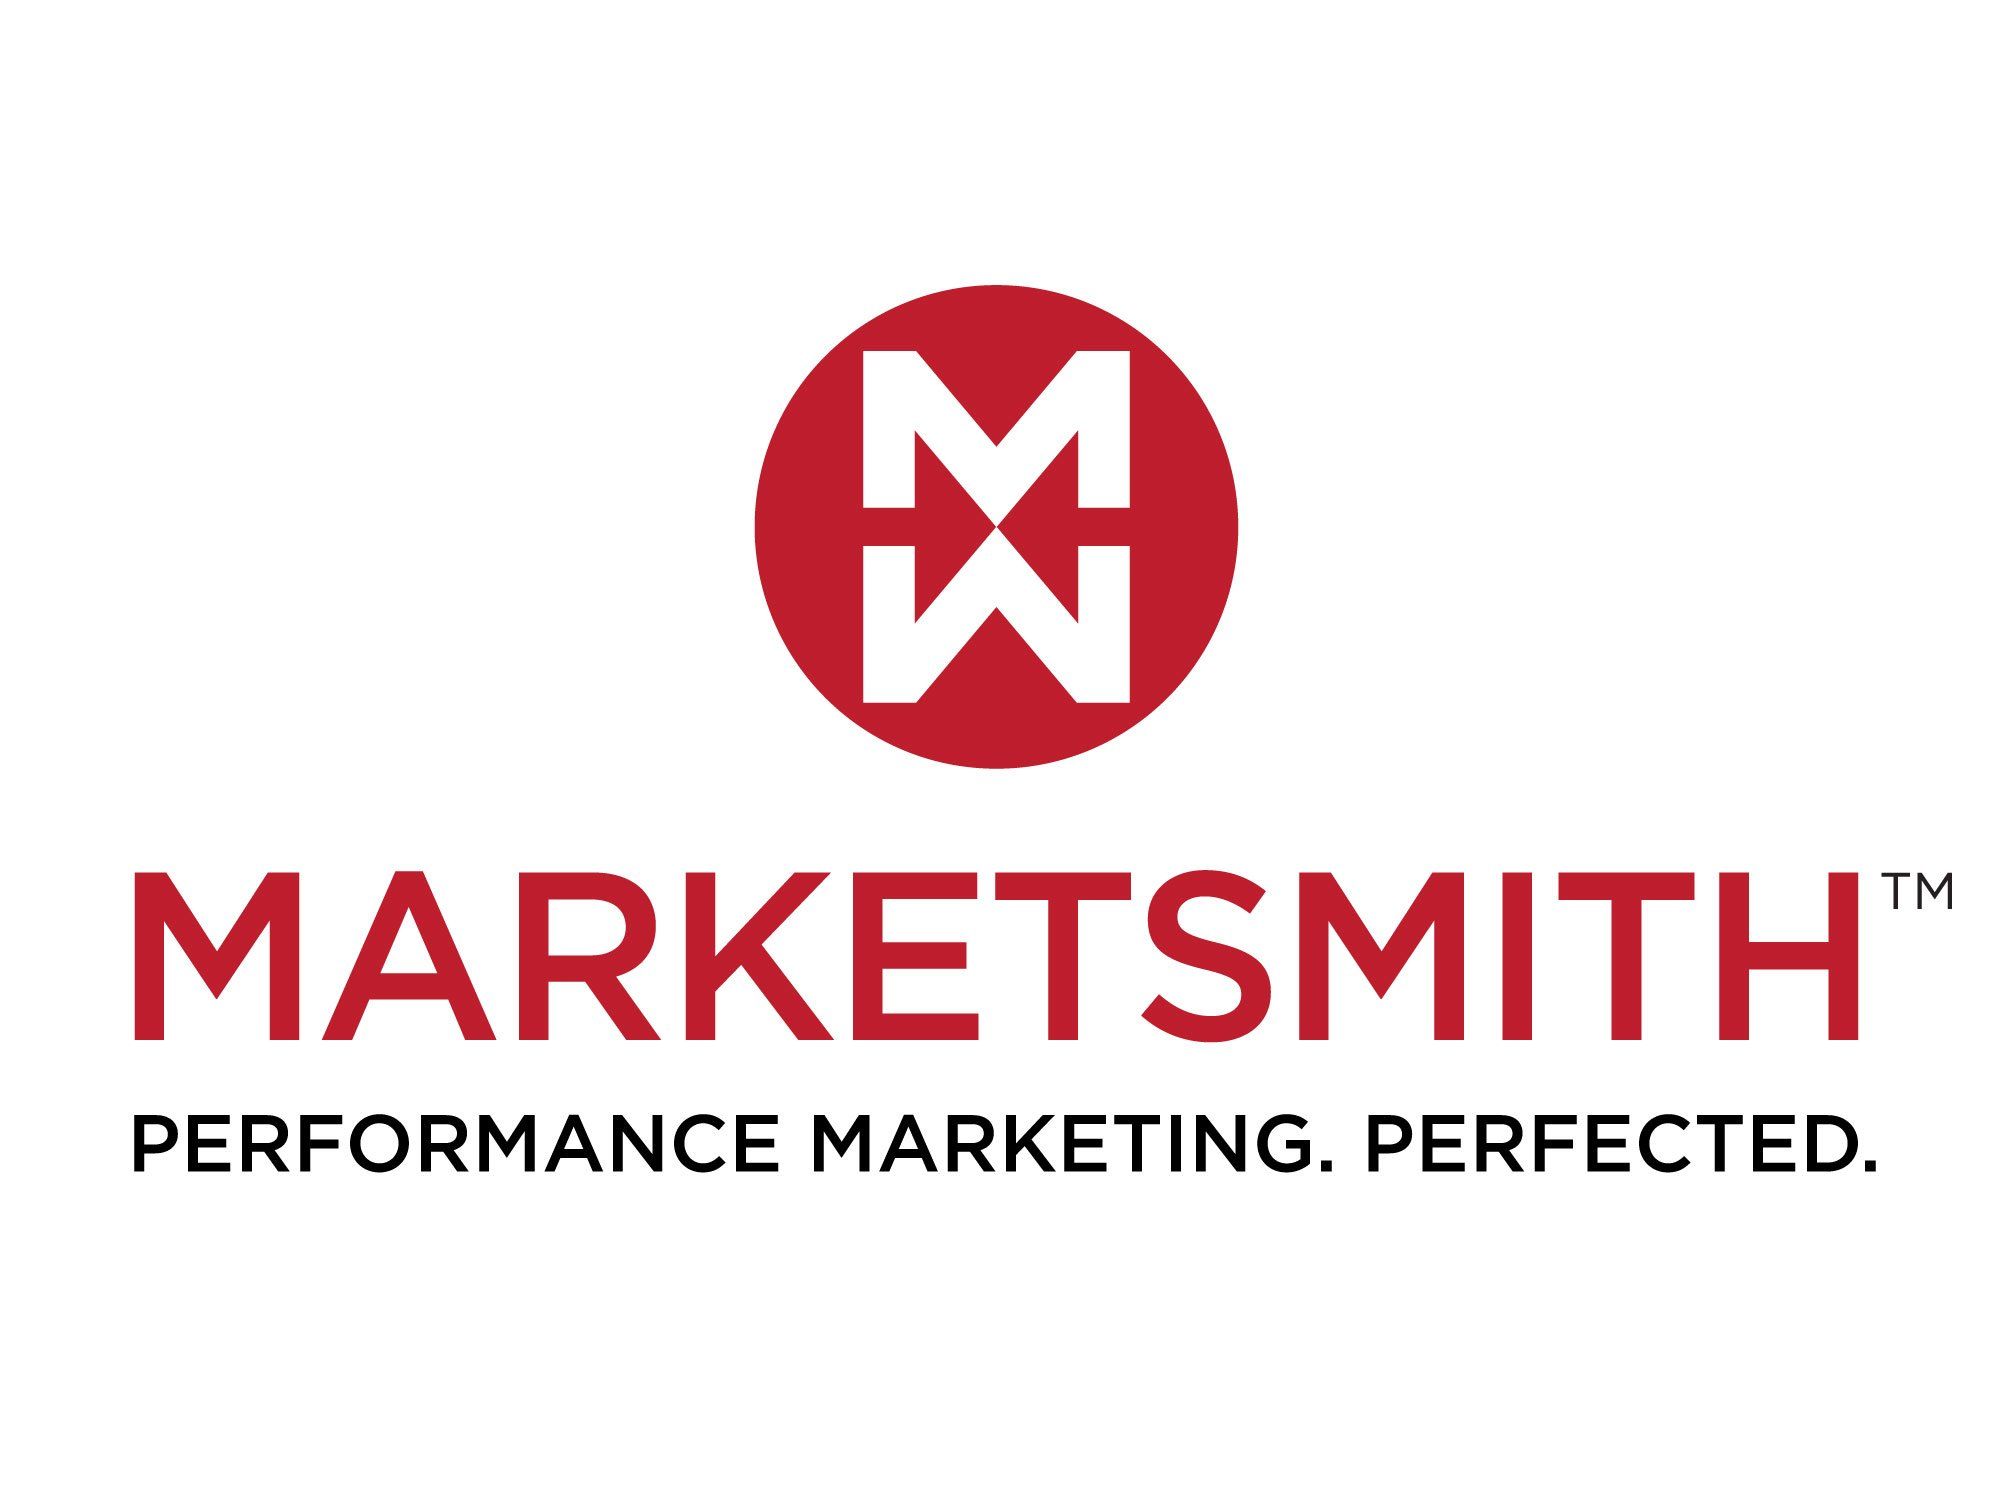 Marketsmith Inc., is one of the largest independent, woman-owned agencies of its kind and is among the nation’s fastest-growing integrated marketing agencies.